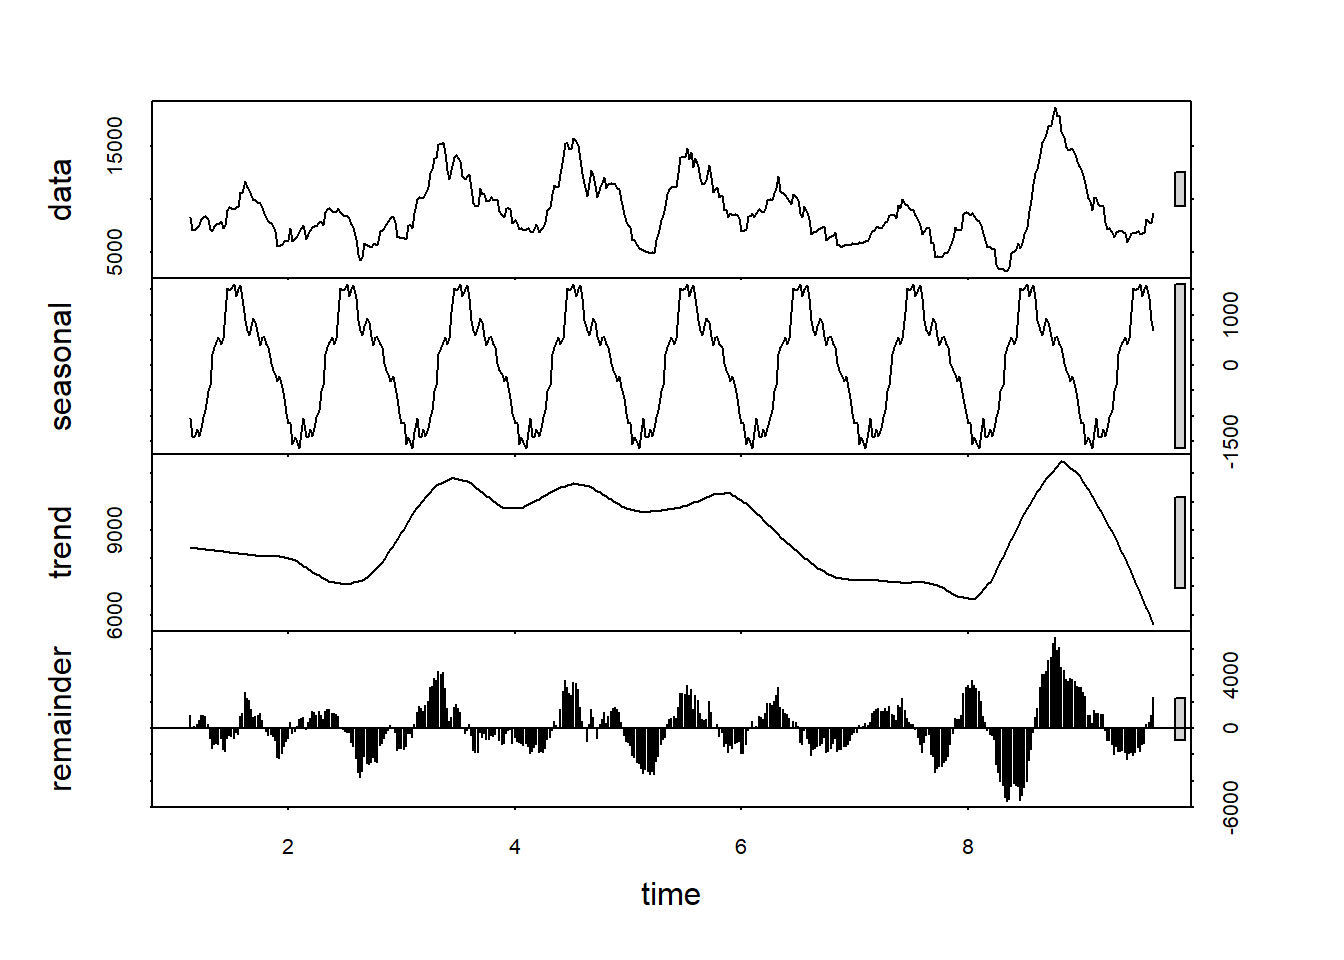 Decomposition using stl of a 15th-order moving average of E. coli data